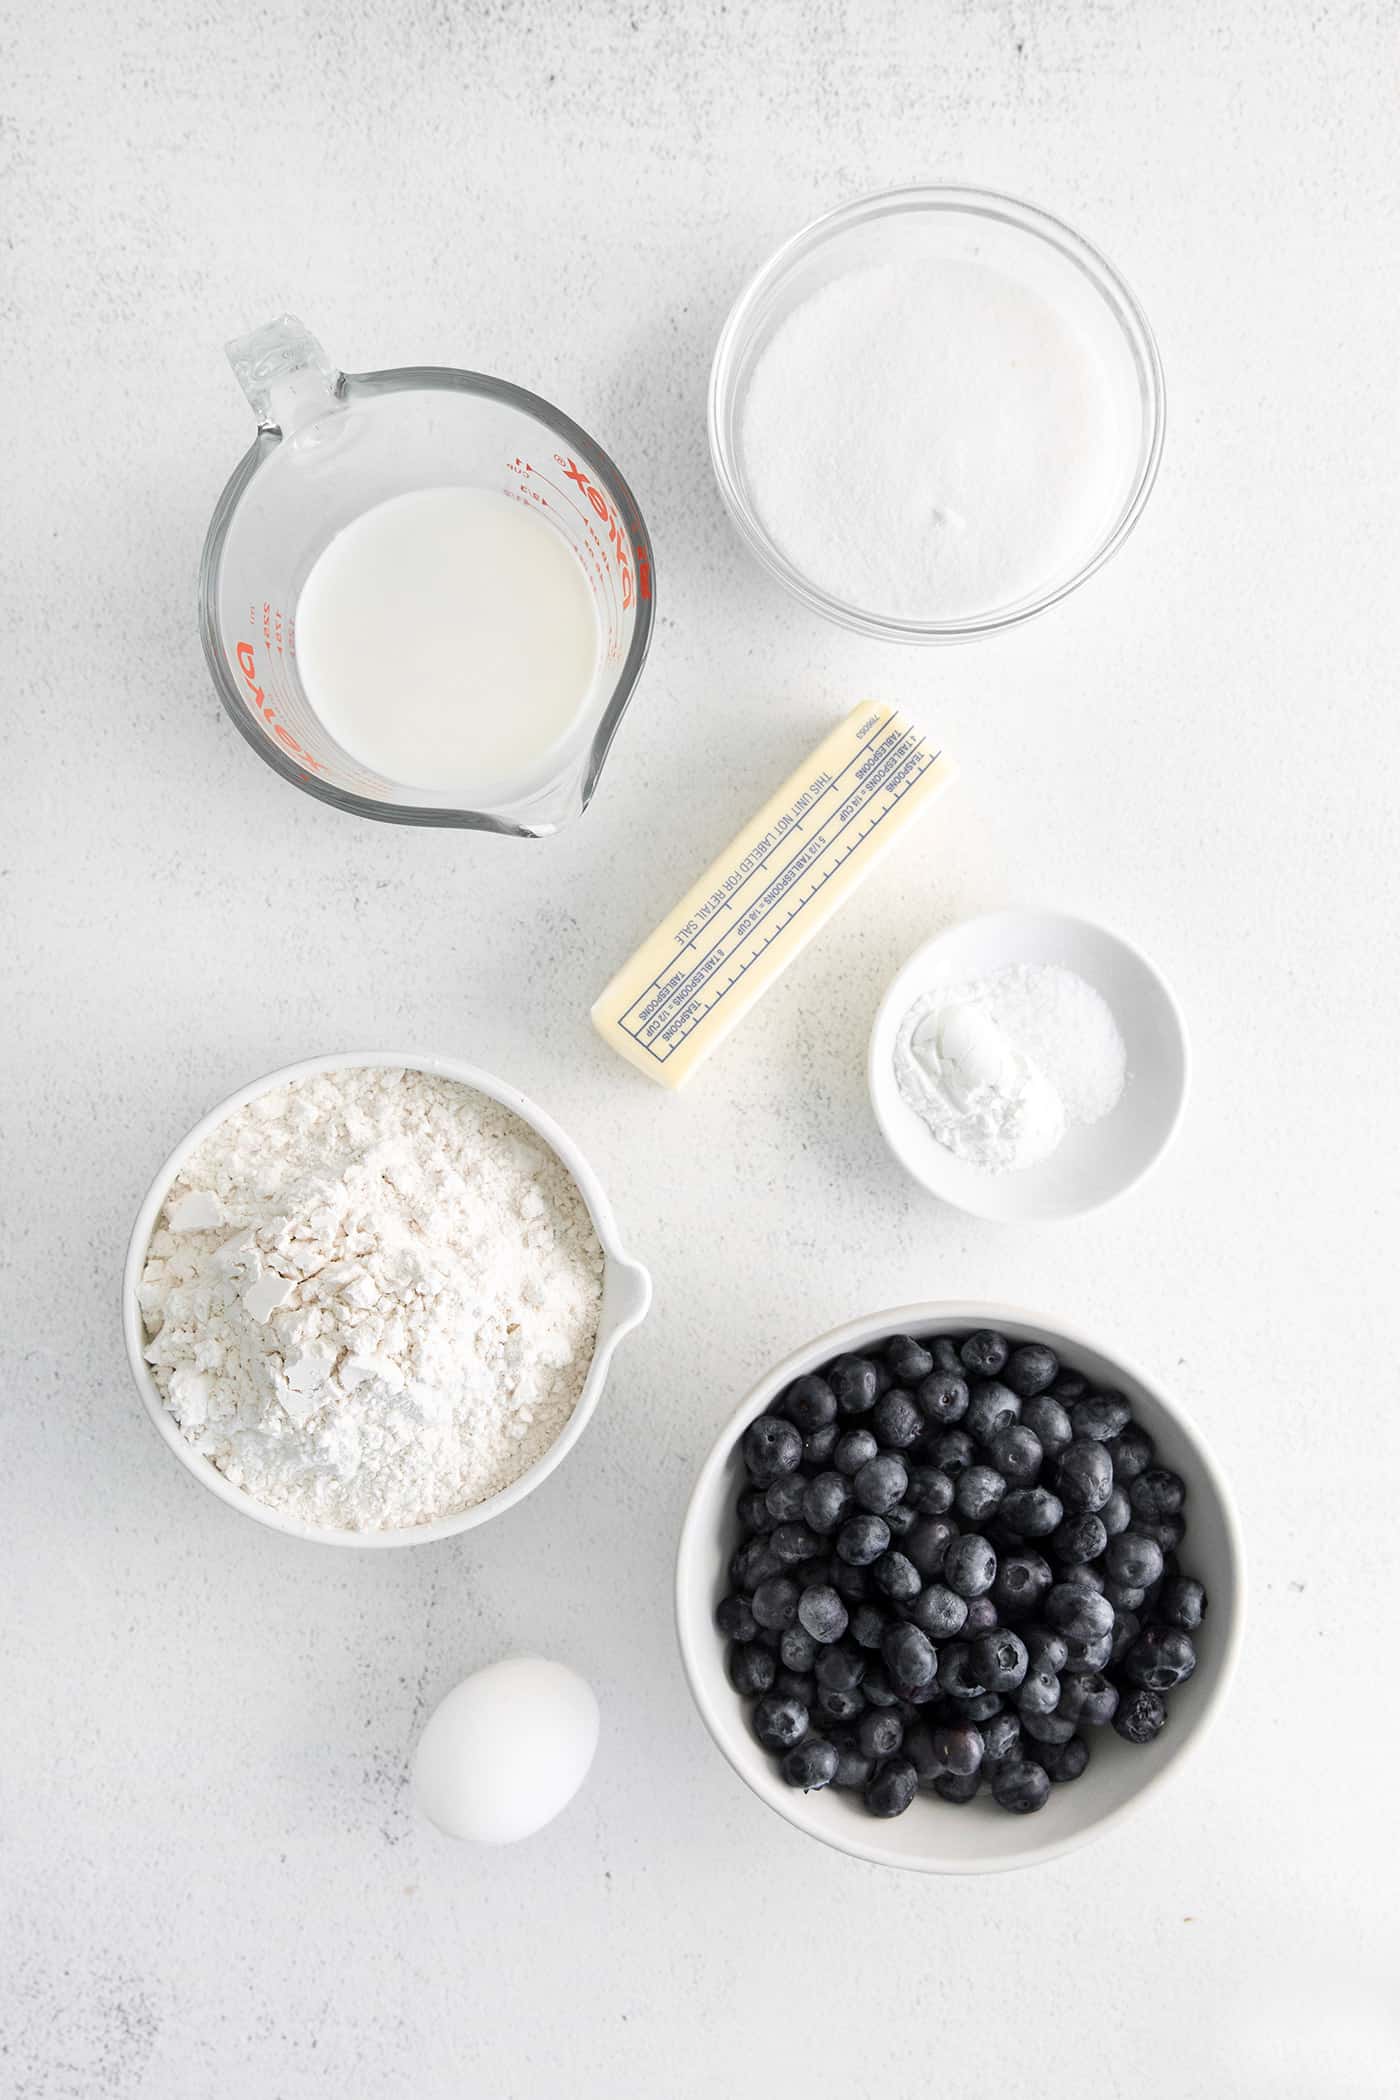 Overhead view of blueberry tea cake ingredients